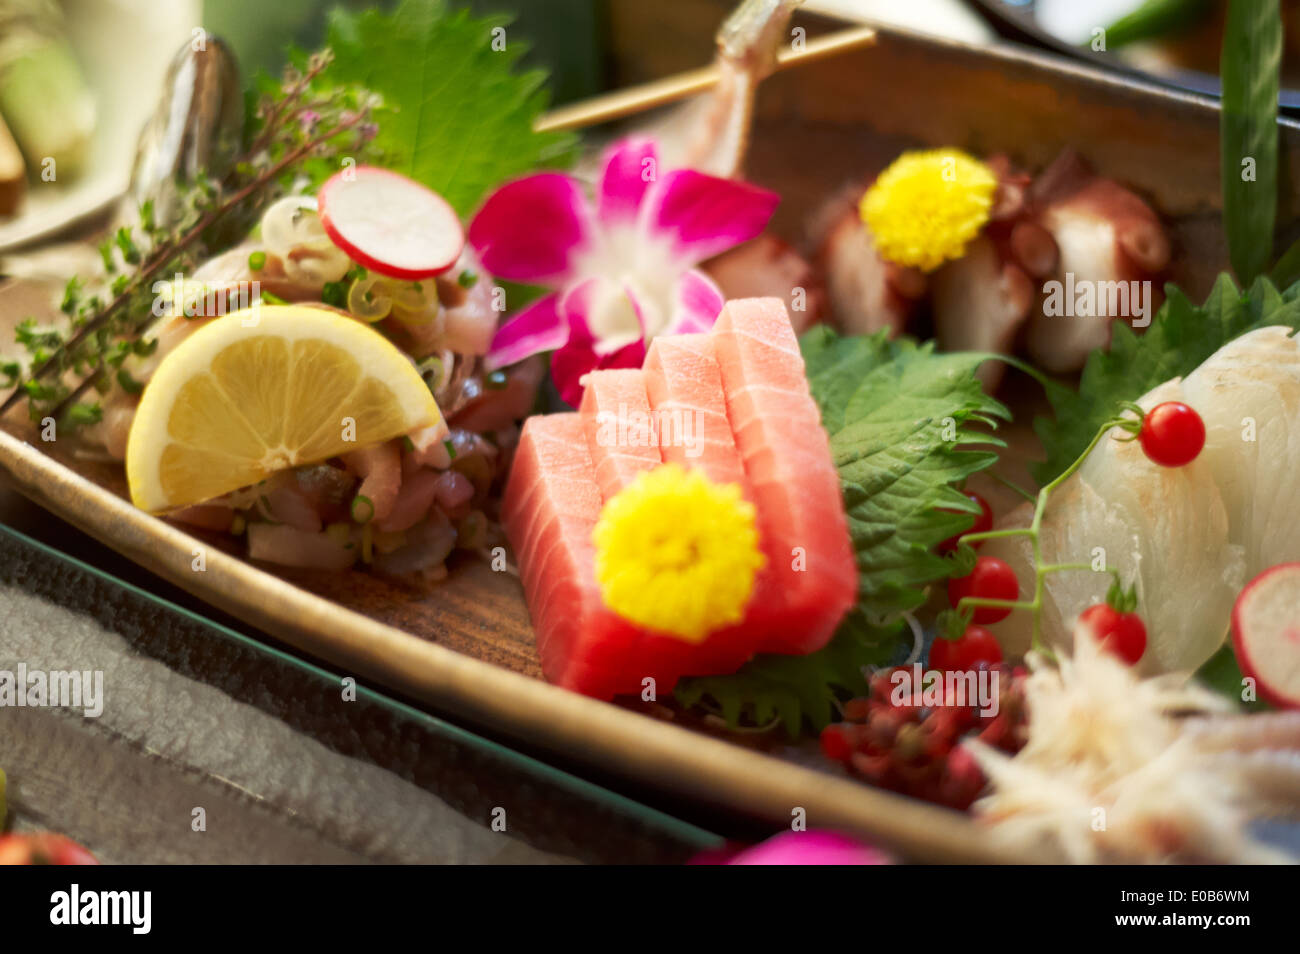 Still life of rustic food with sliced raw fish, fruit and flowers Stock Photo